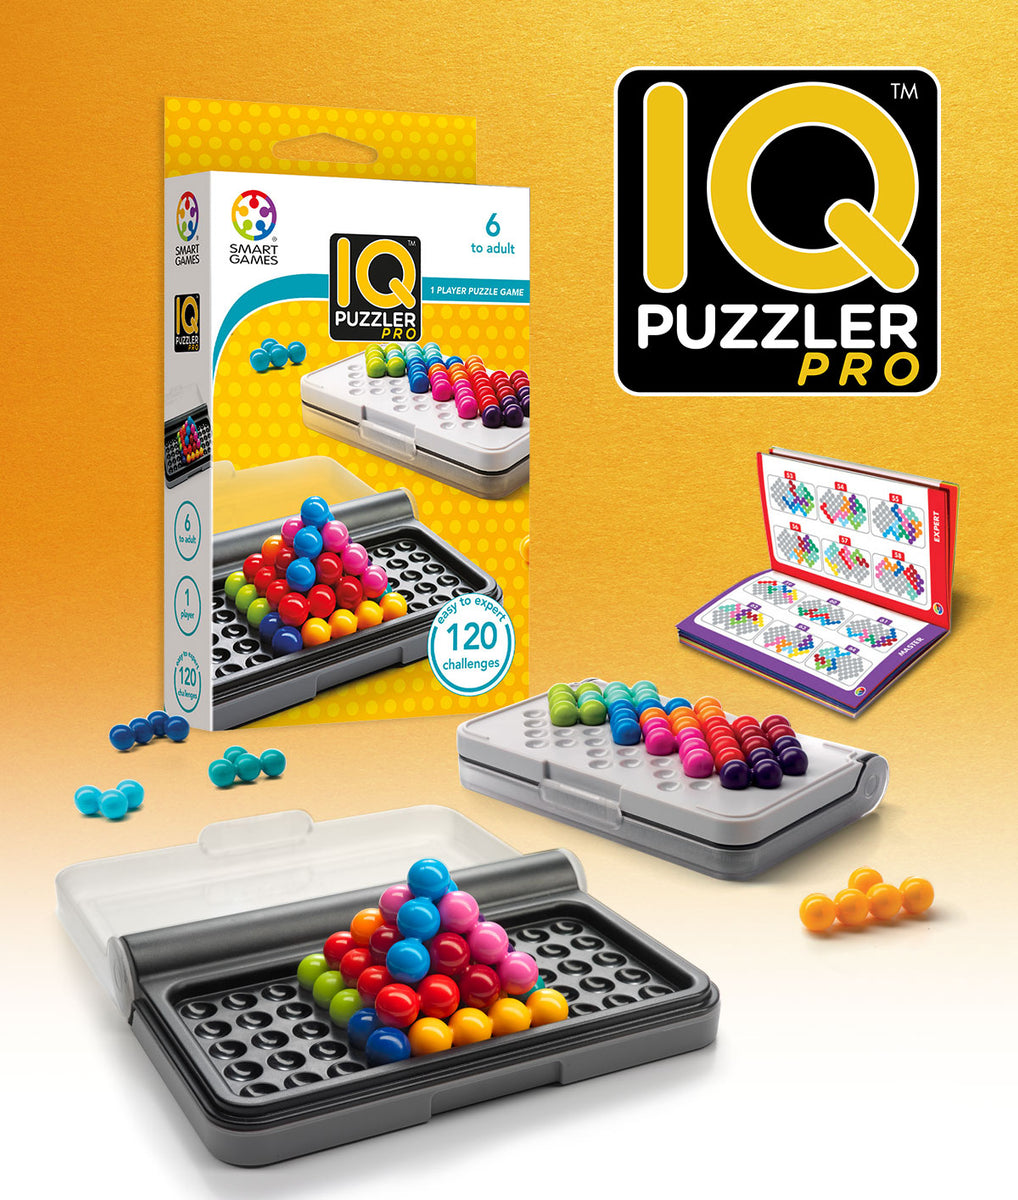 Smart Games IQ PUZZLER PRO Age 6 To Adult – Toy-Box@hants